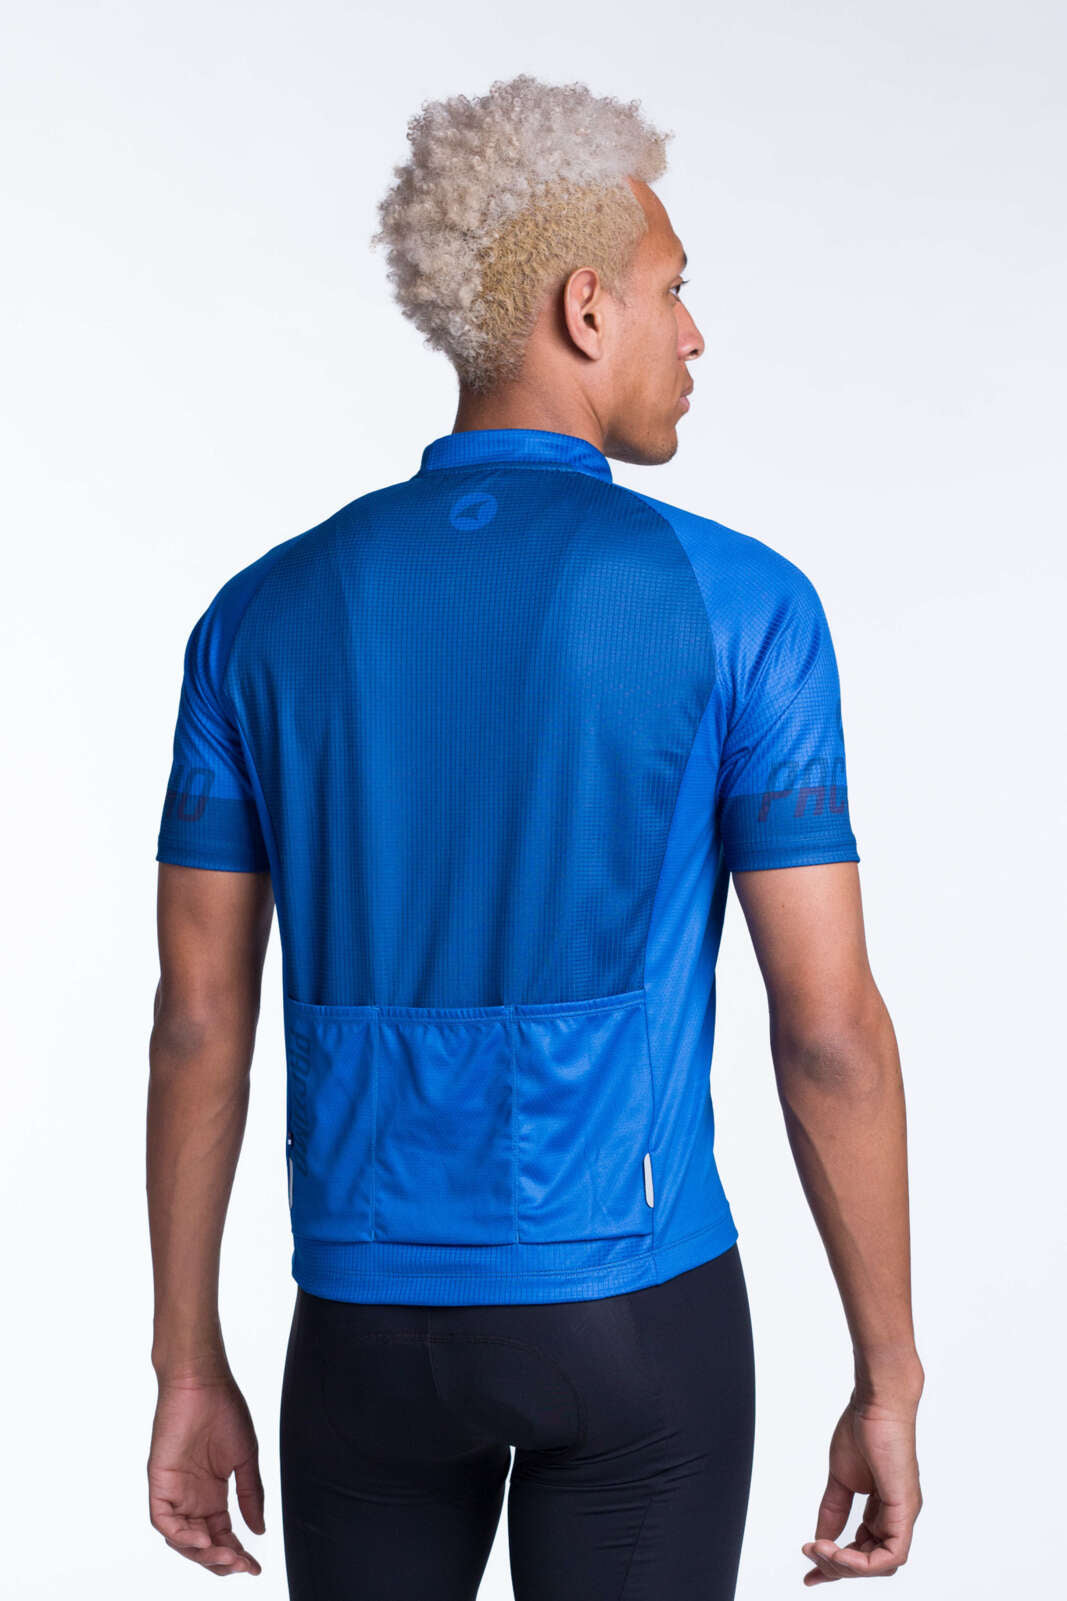 Men's Blue Loose Fit Cycling Jersey - Back View